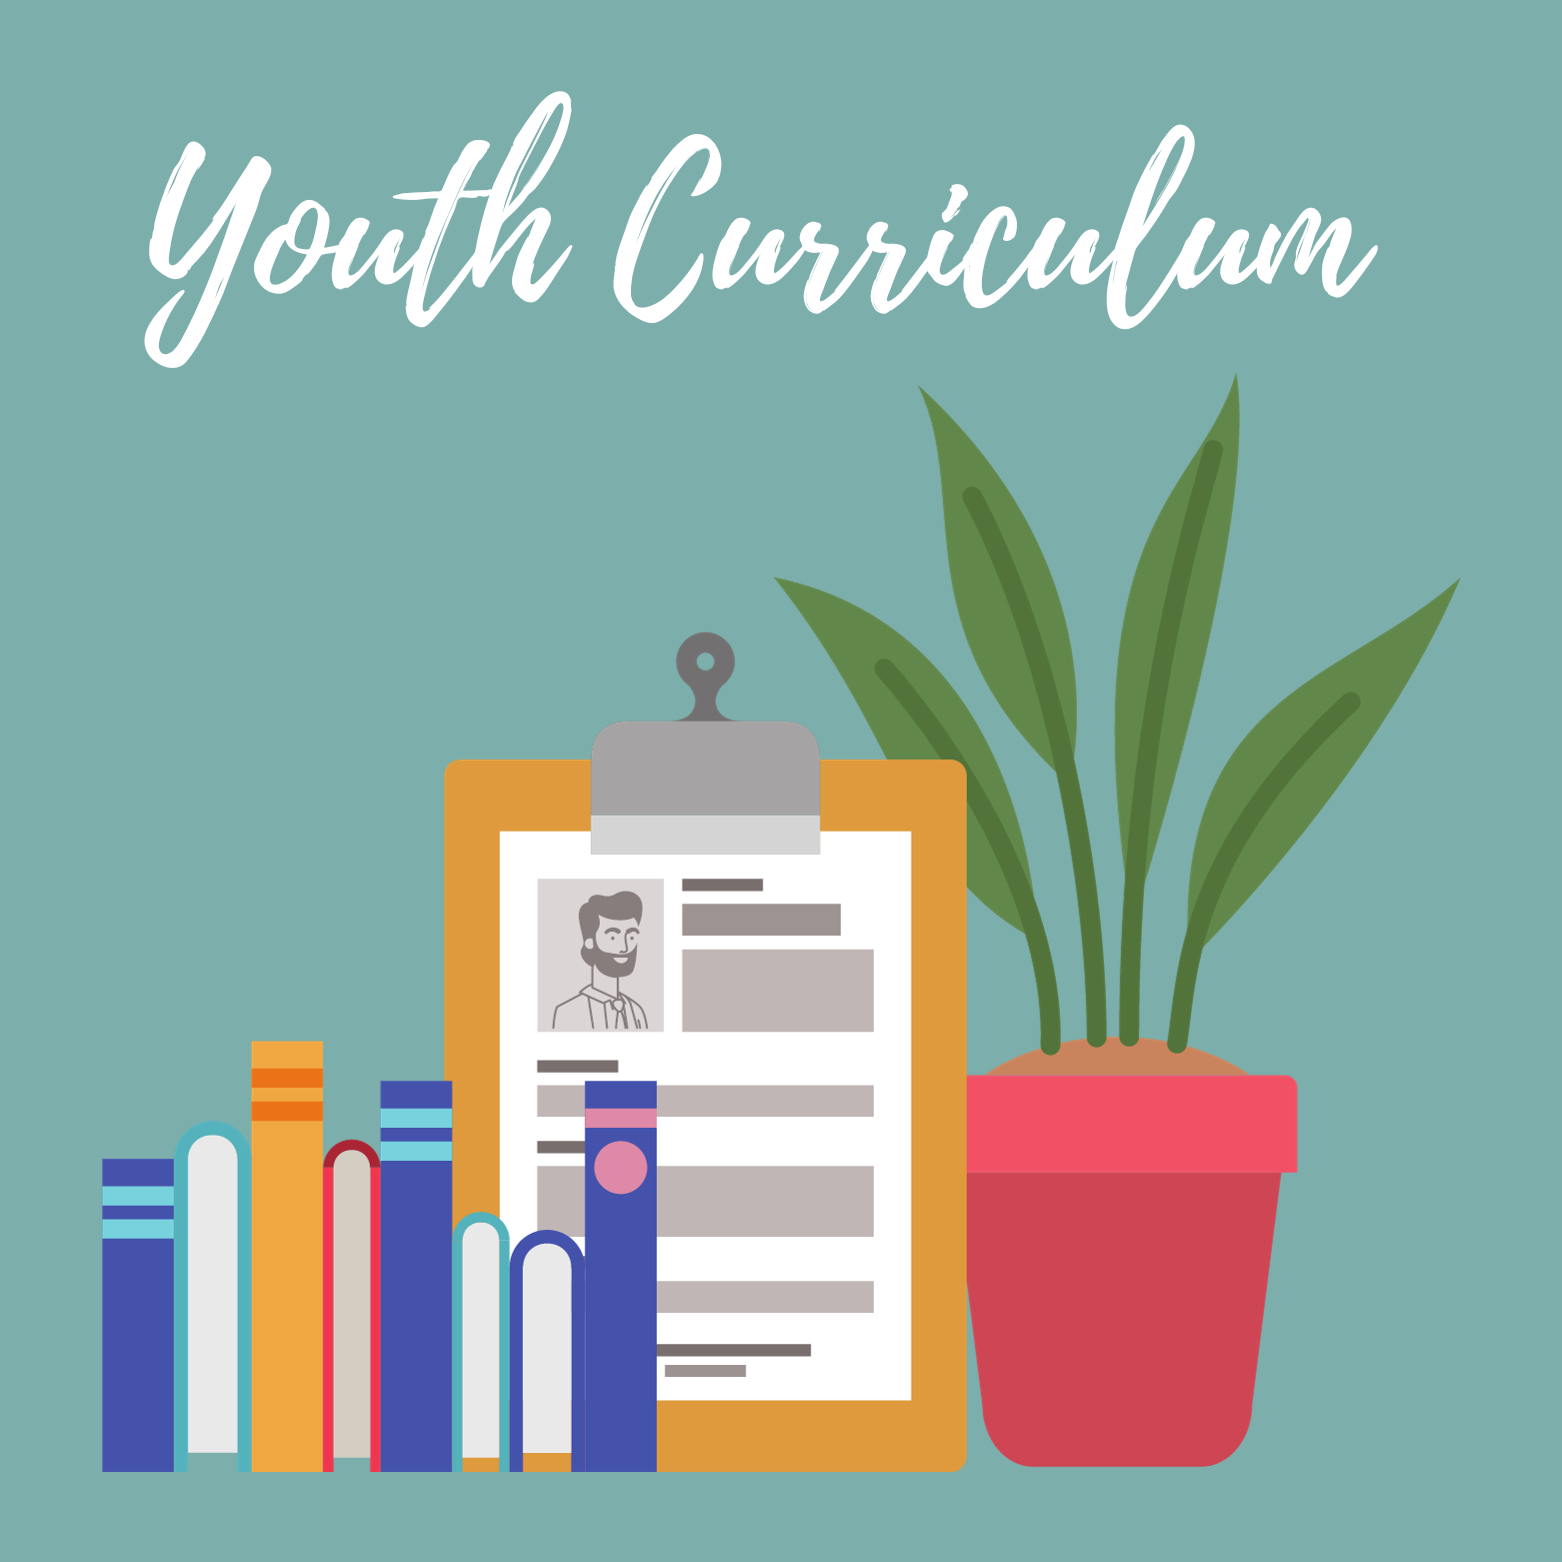 Youth Resources_youth curriculum